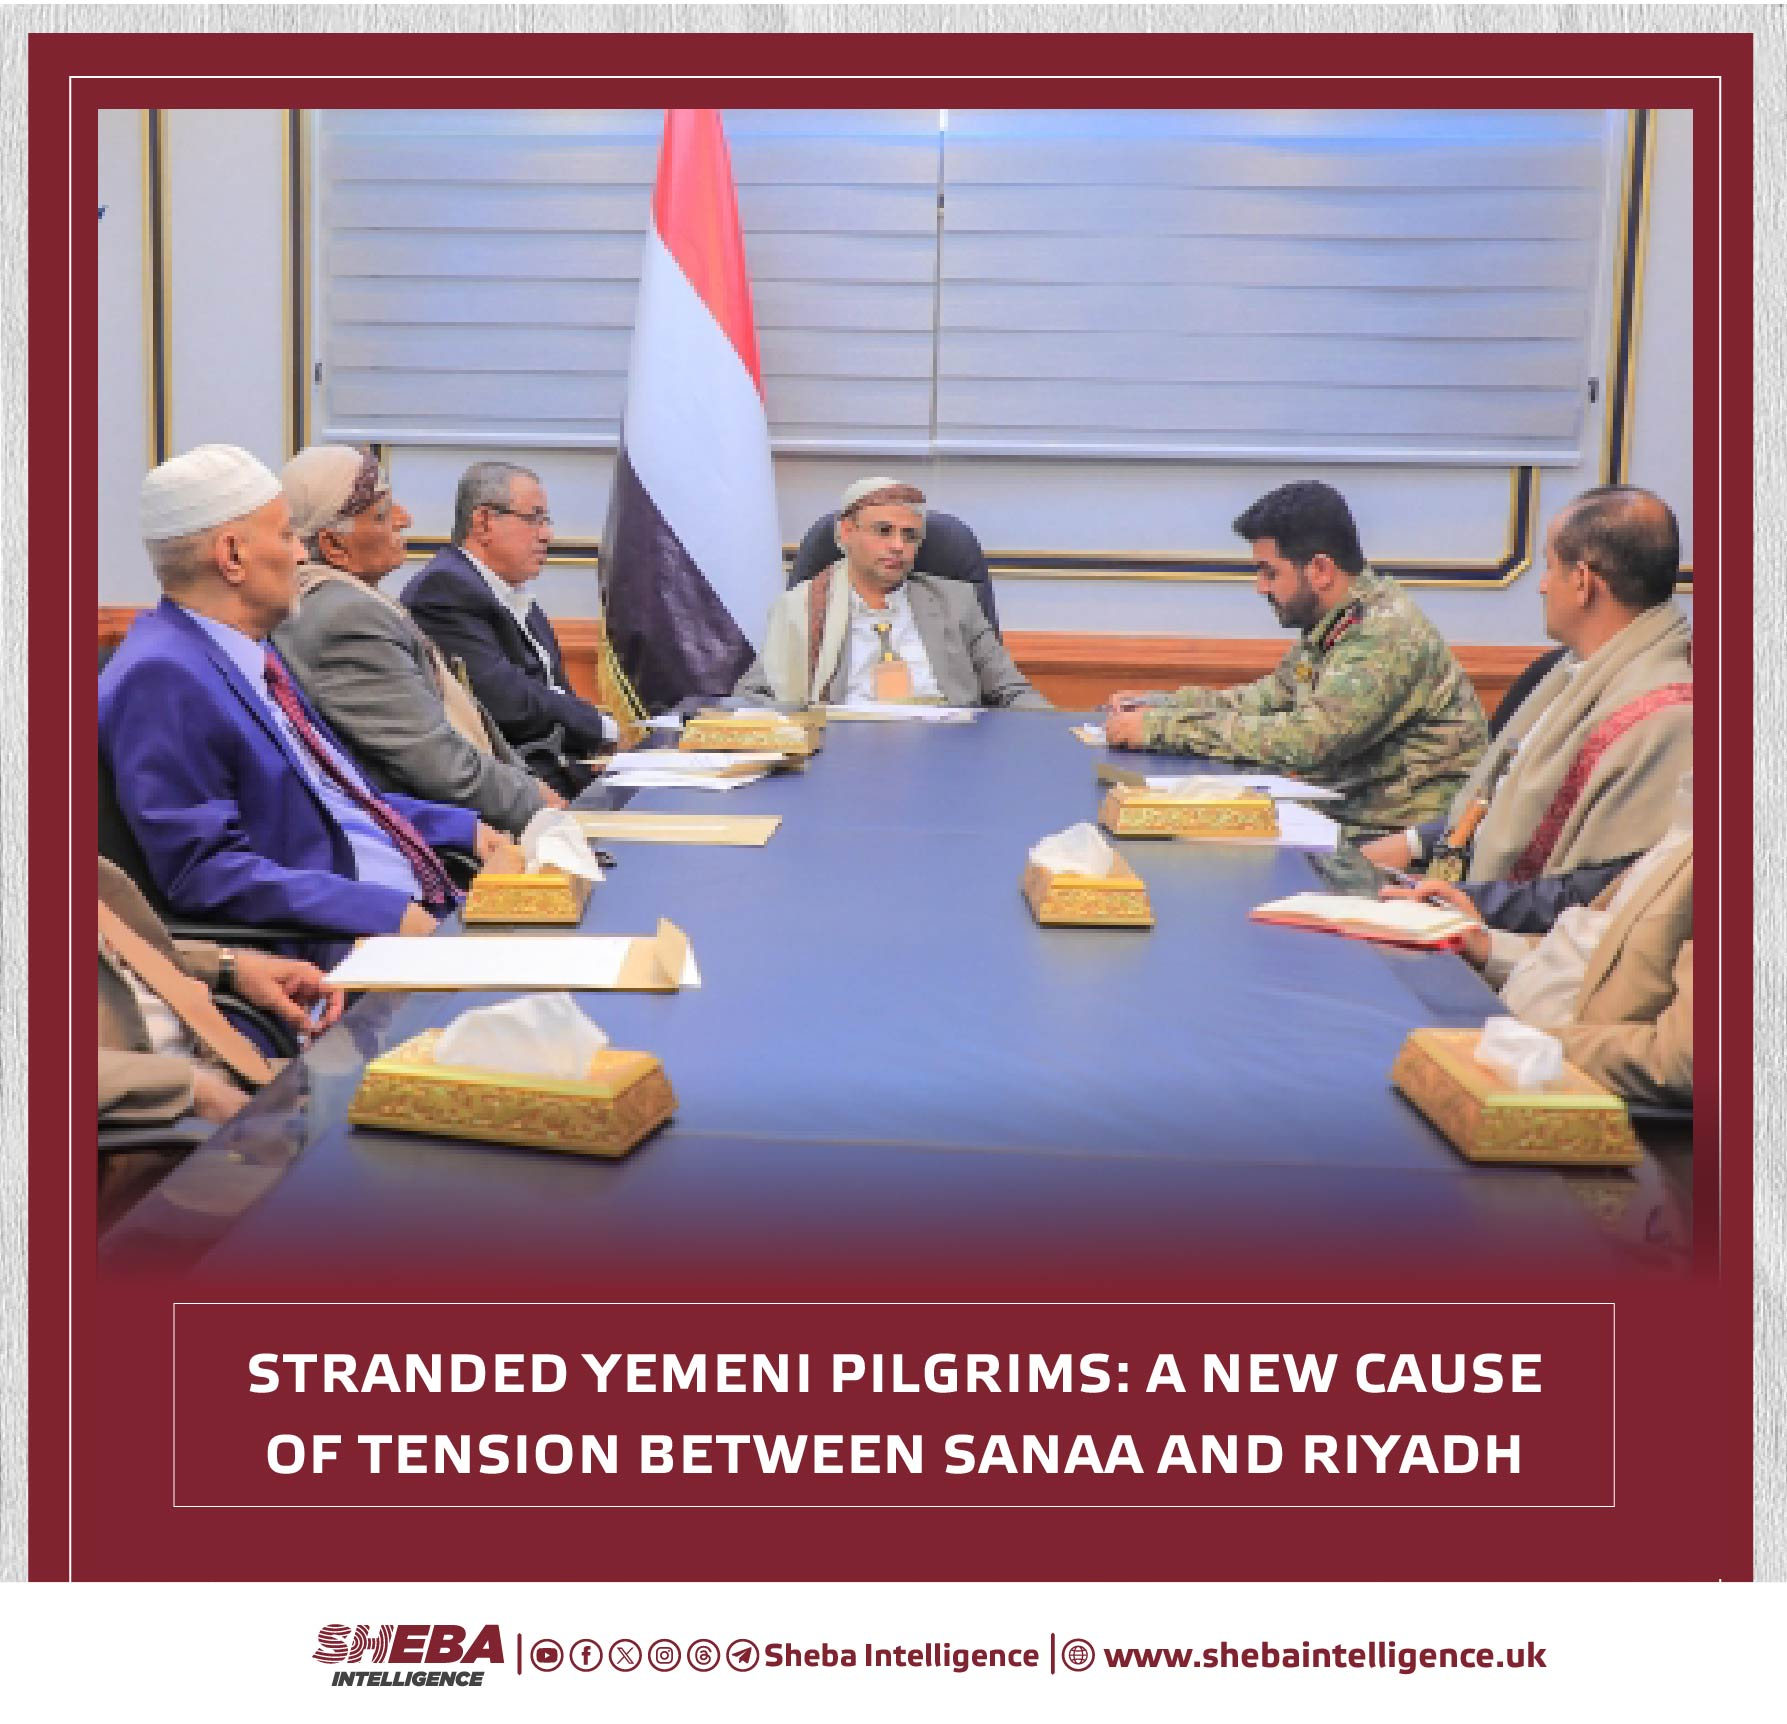 Stranded Yemeni Pilgrims: A New Cause of Tension Between Houthis and Riyadh